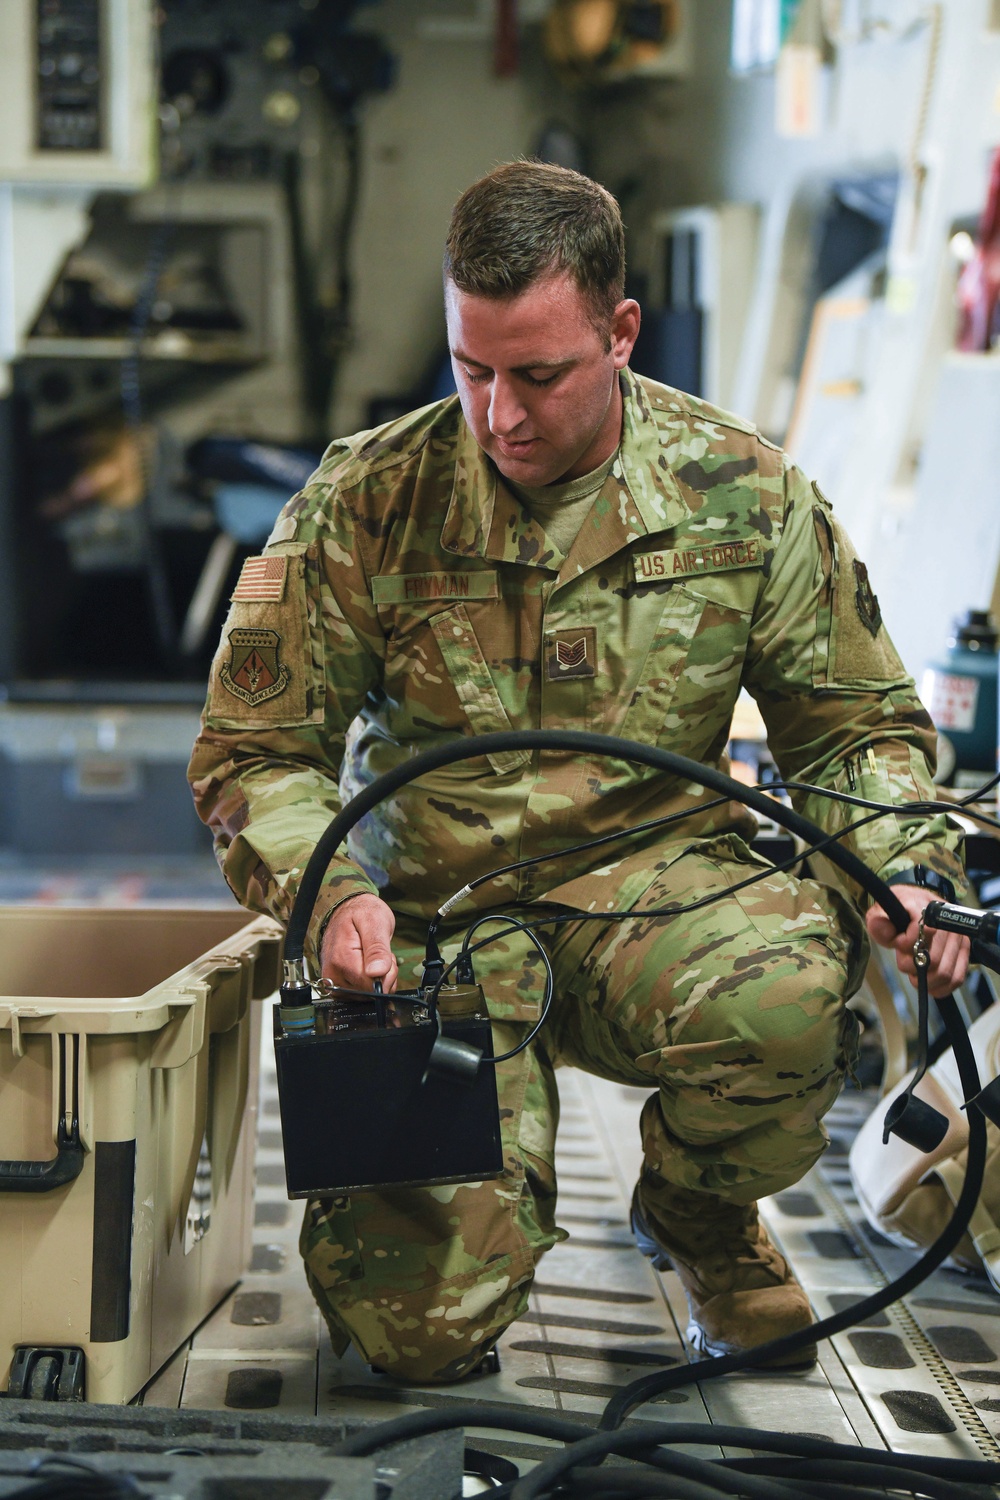 Prior service maintainers share leadership, time management skills